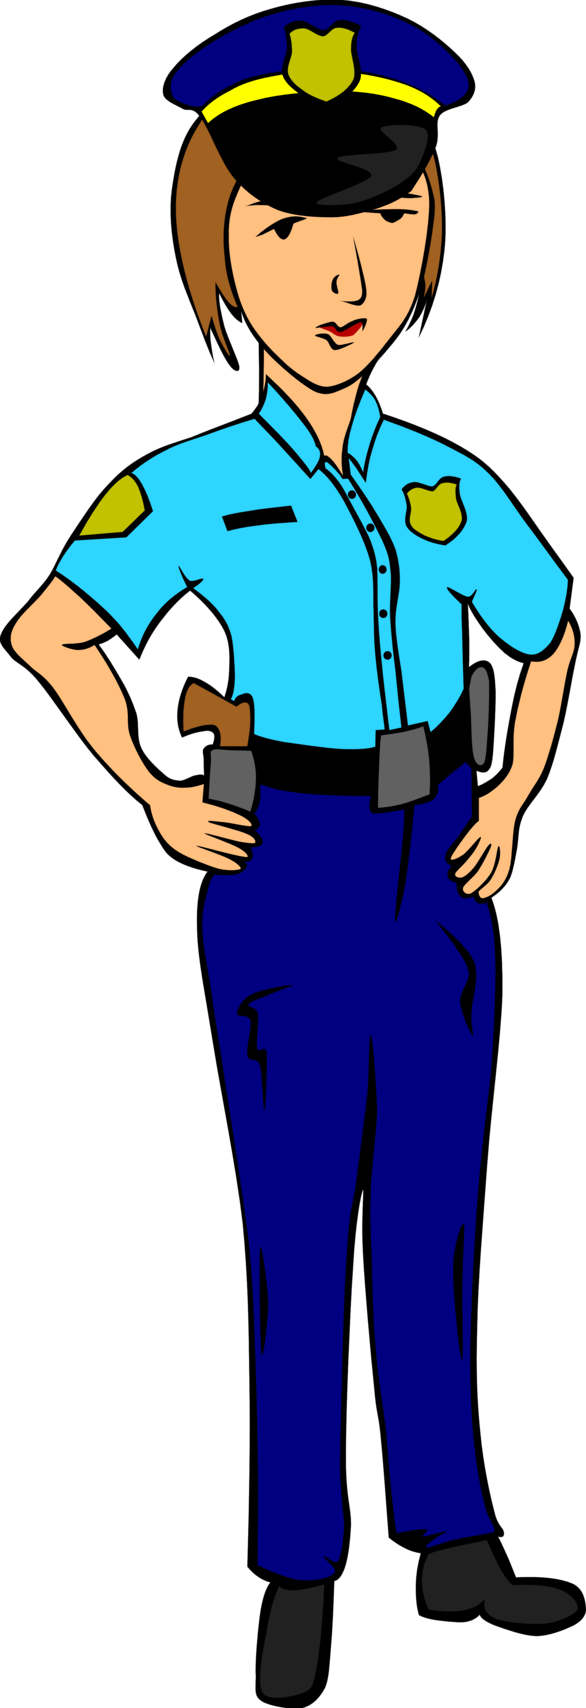 Policeman Clip Art Free - Free Clipart Images